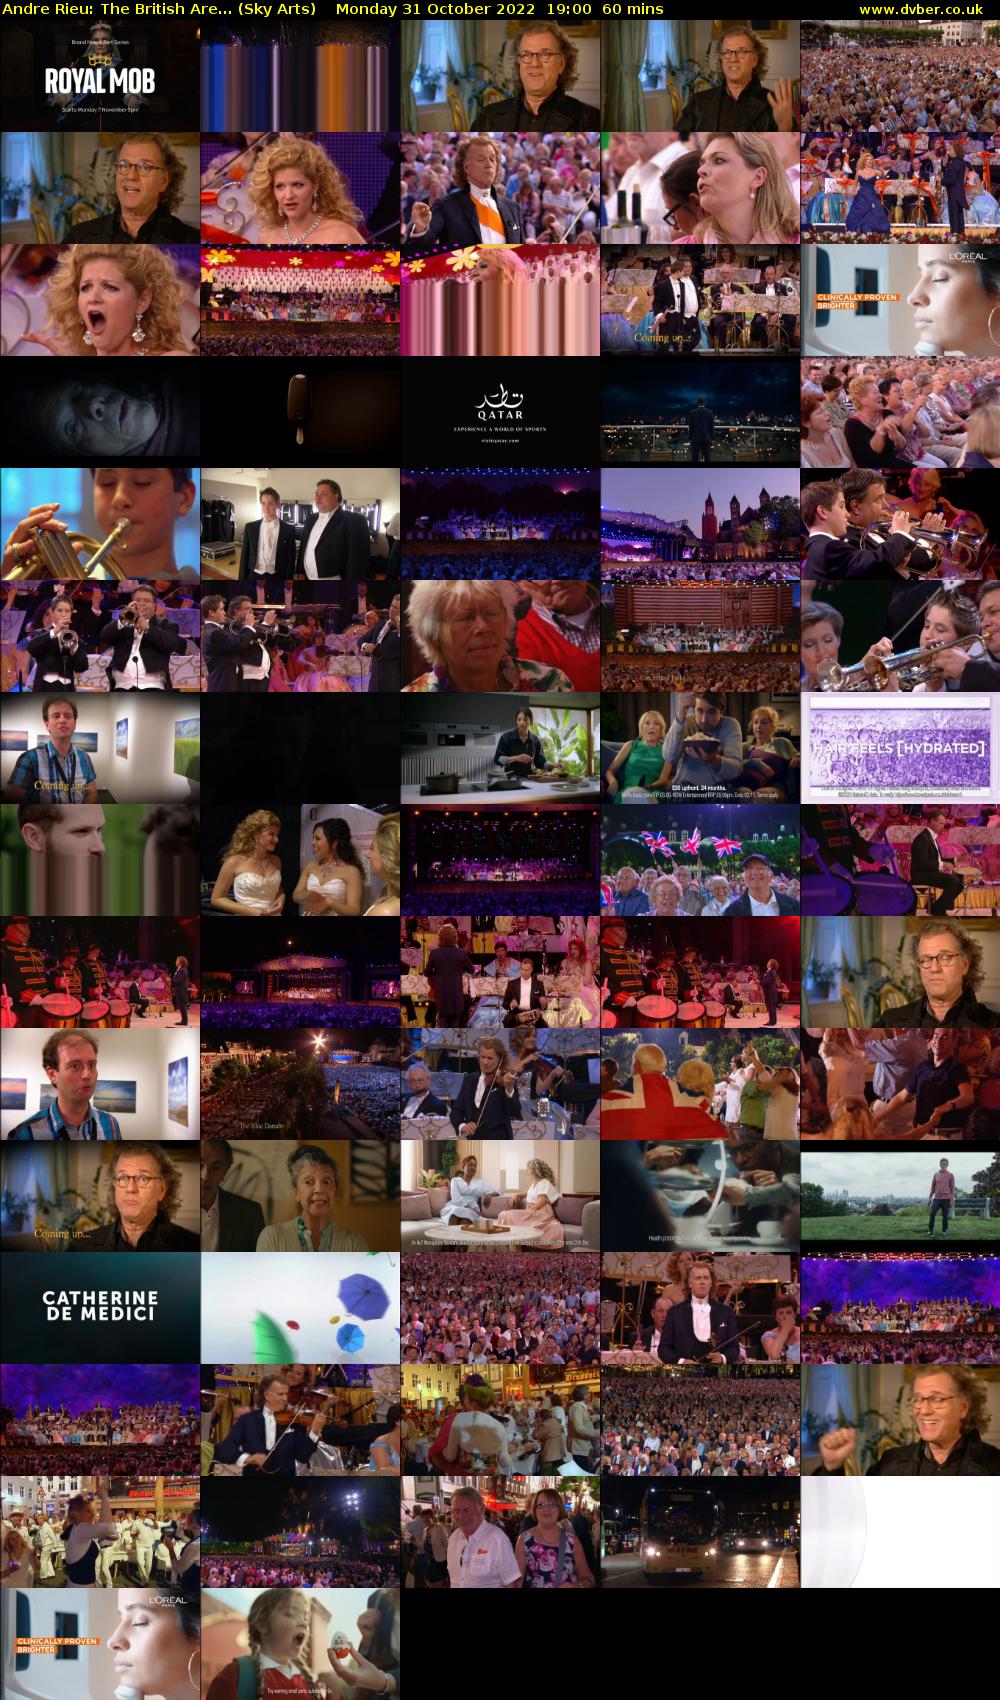 Andre Rieu: The British Are... (Sky Arts) Monday 31 October 2022 19:00 - 20:00